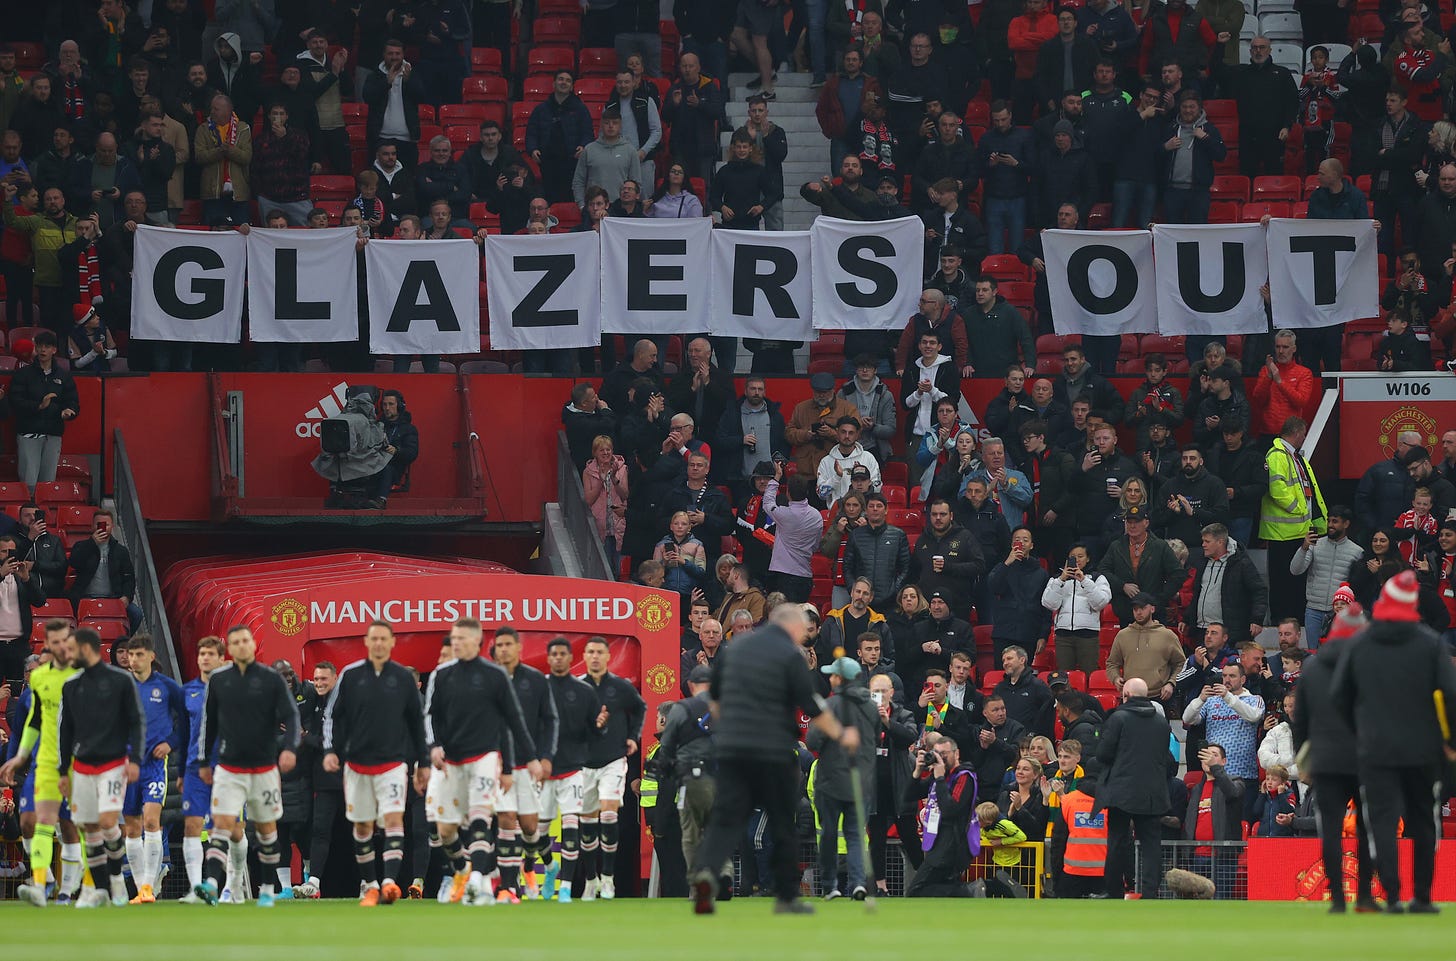 Man Utd fans hold 'Glazers out' banners with thousands of seats empty at  Old Trafford vs Chelsea as protests continue | The Sun